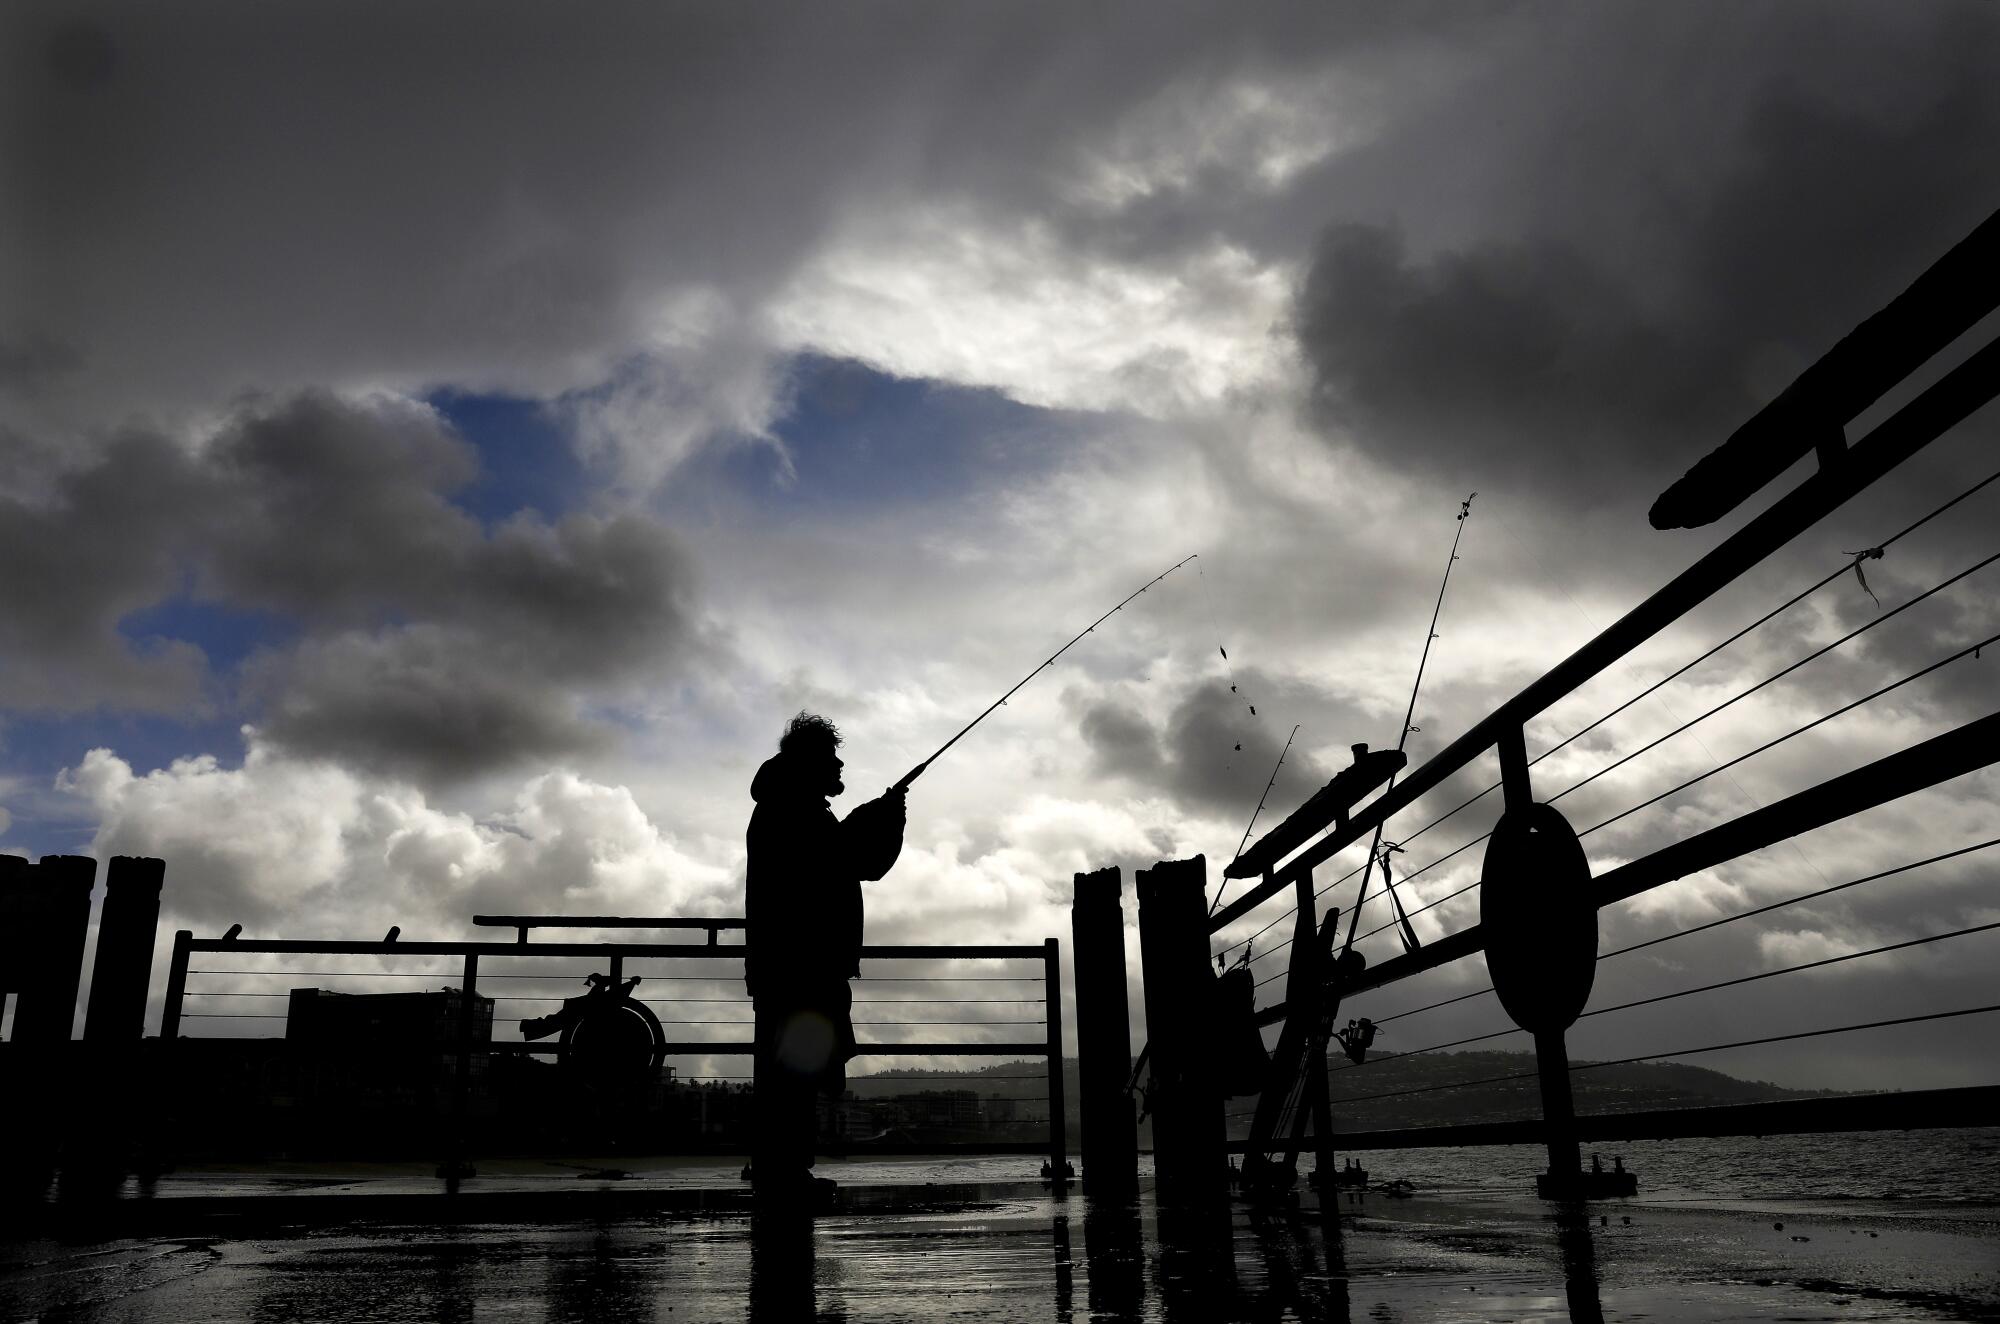 Dark clouds hang over a fisherman on a pier.